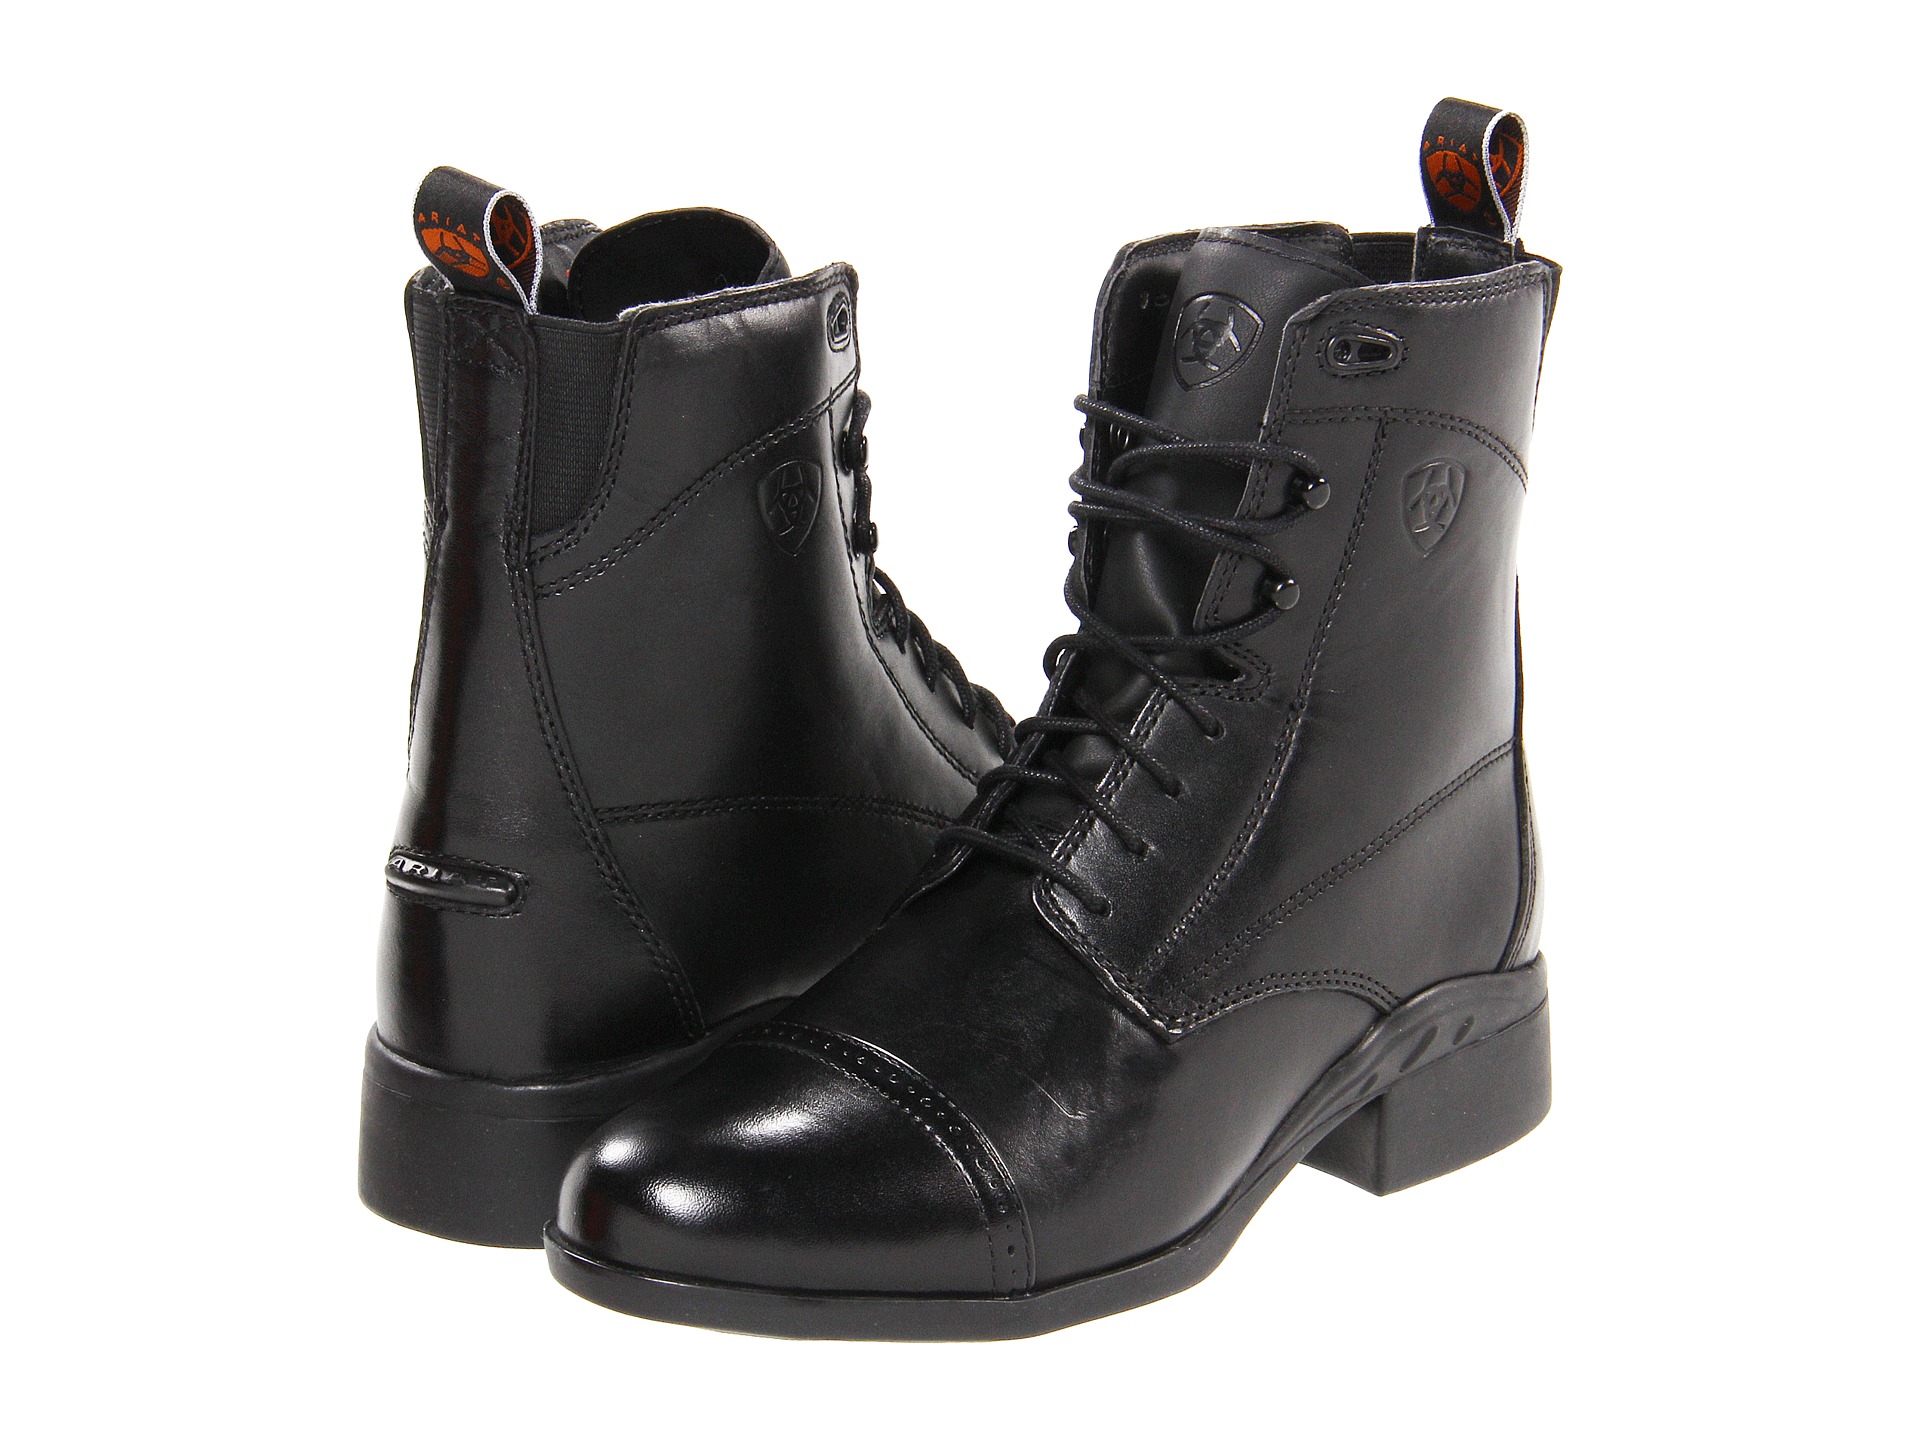 Ariat, Boots, Riding Boots, Women, Winter | Shipped Free at Zappos